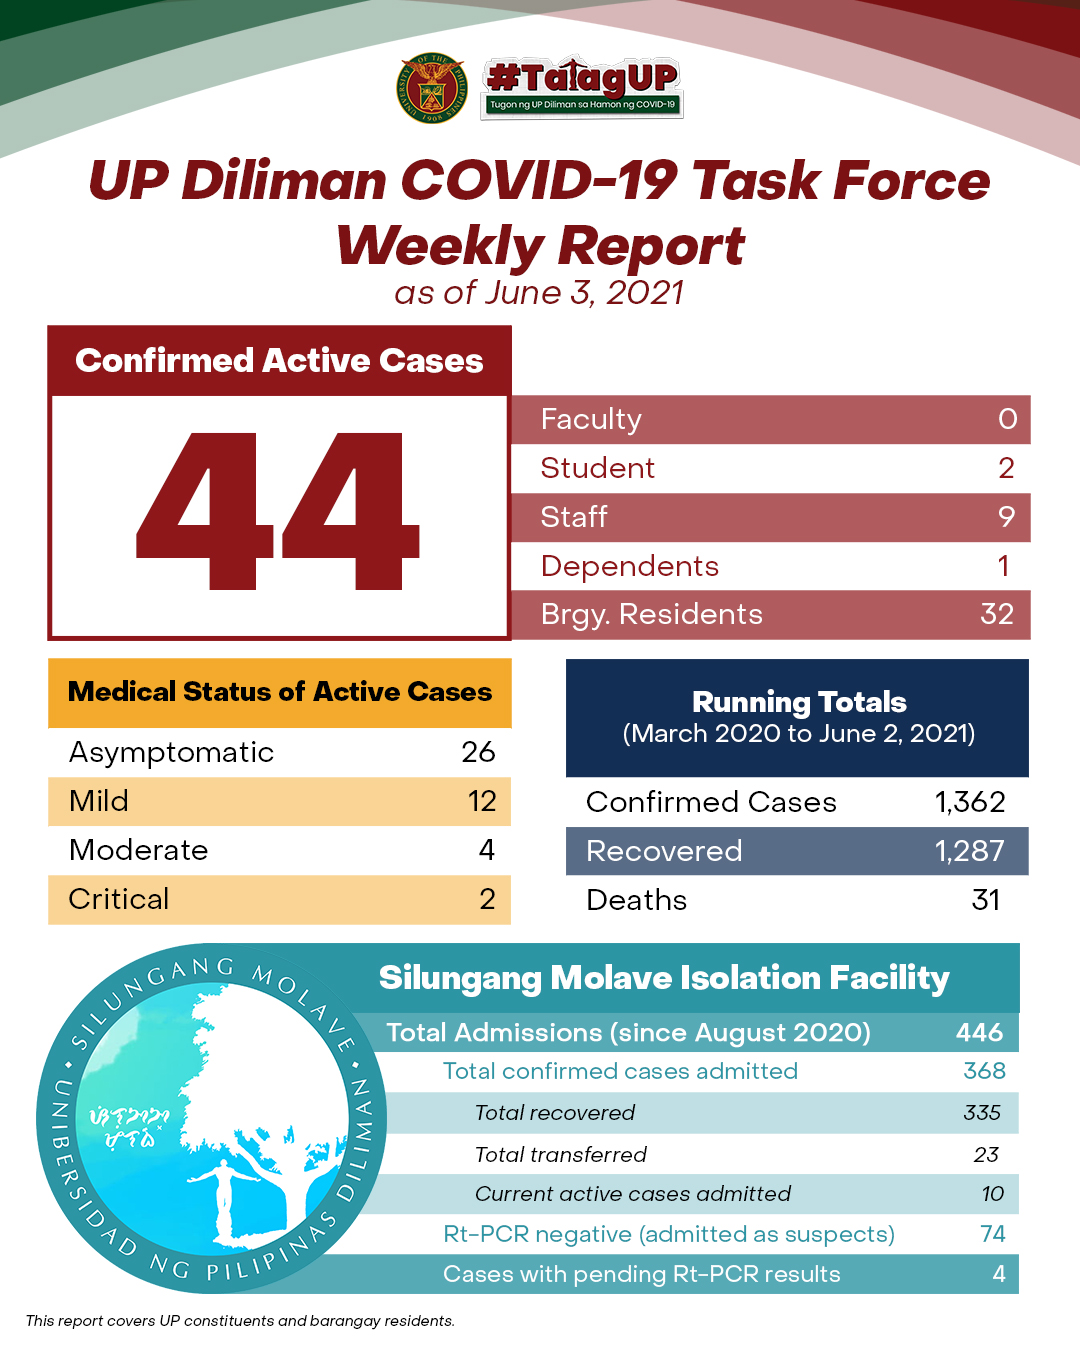 UP Diliman COVID-19 Task Force Weekly Report as of June 3, 2021